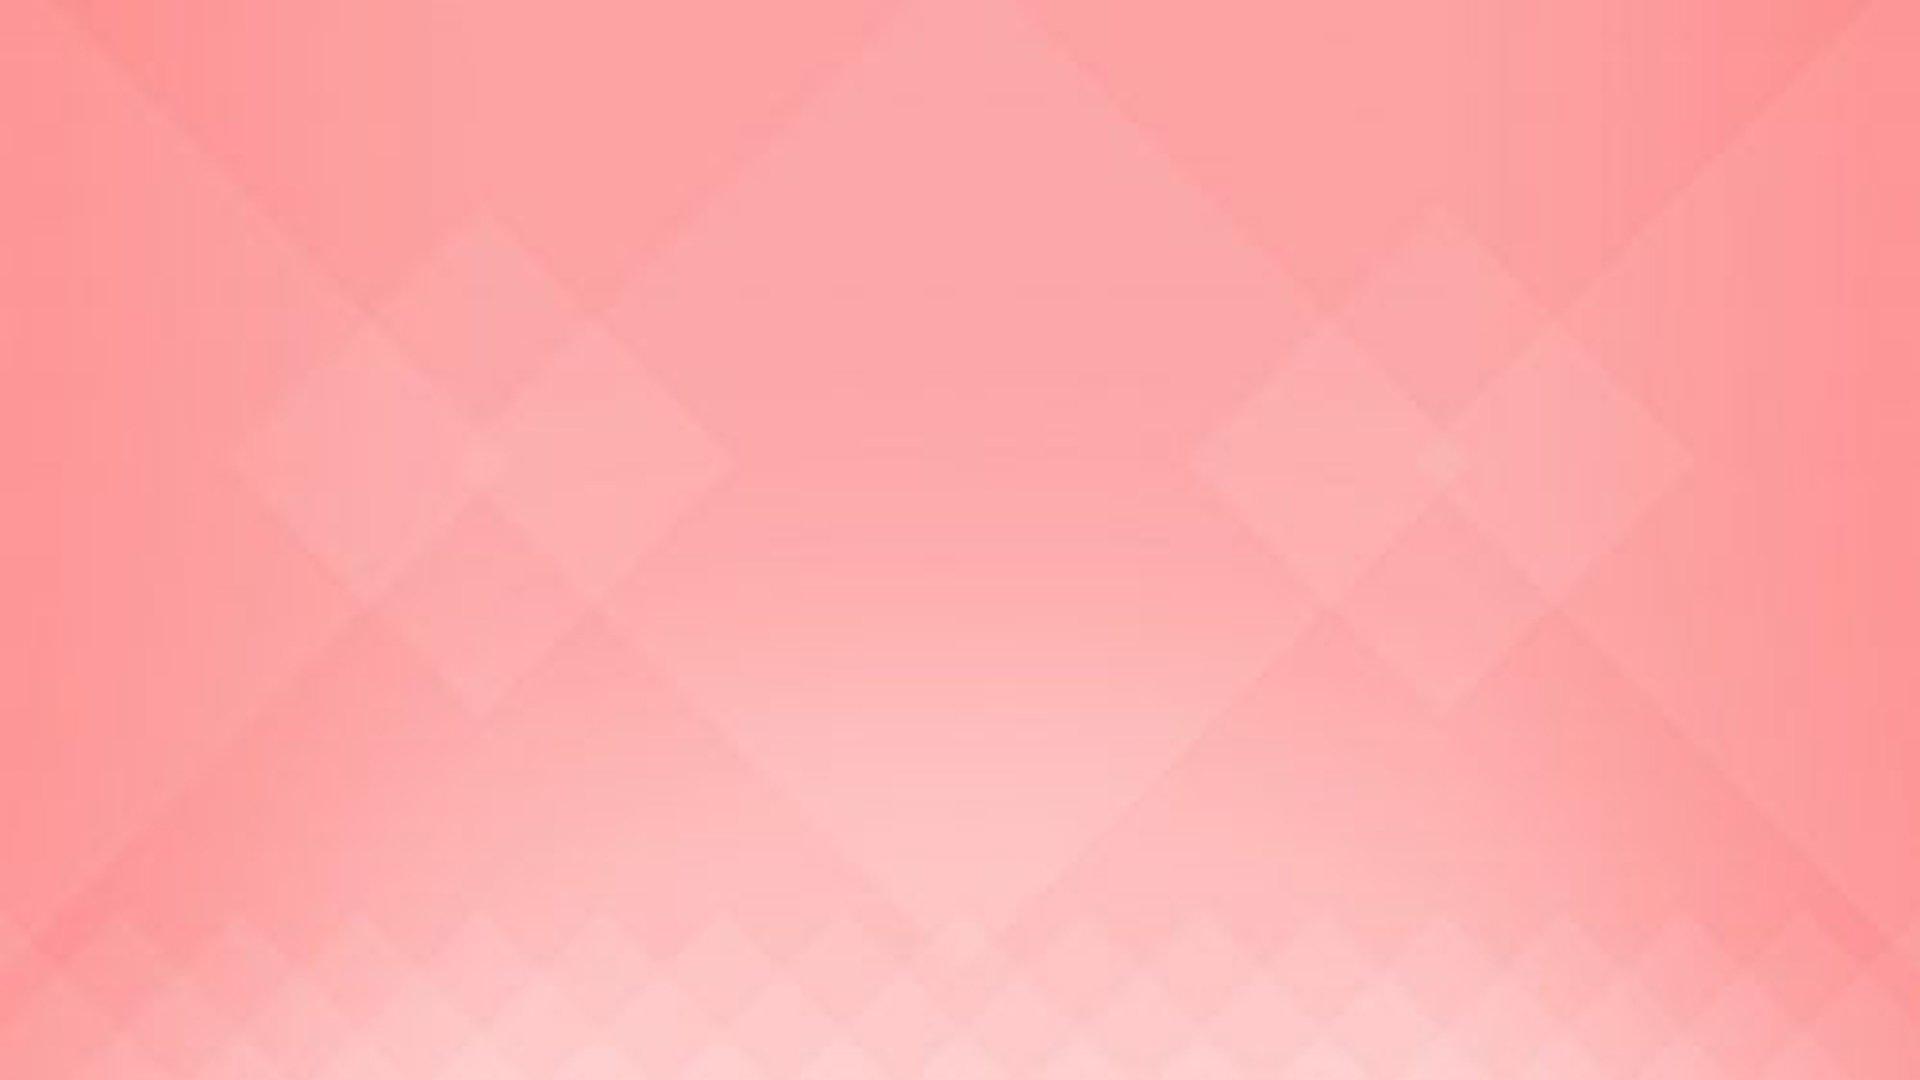 Coral Colored Wallpaper for Custom Background Wallpaper. Wallpaper Download. High Resolution Wallpaper